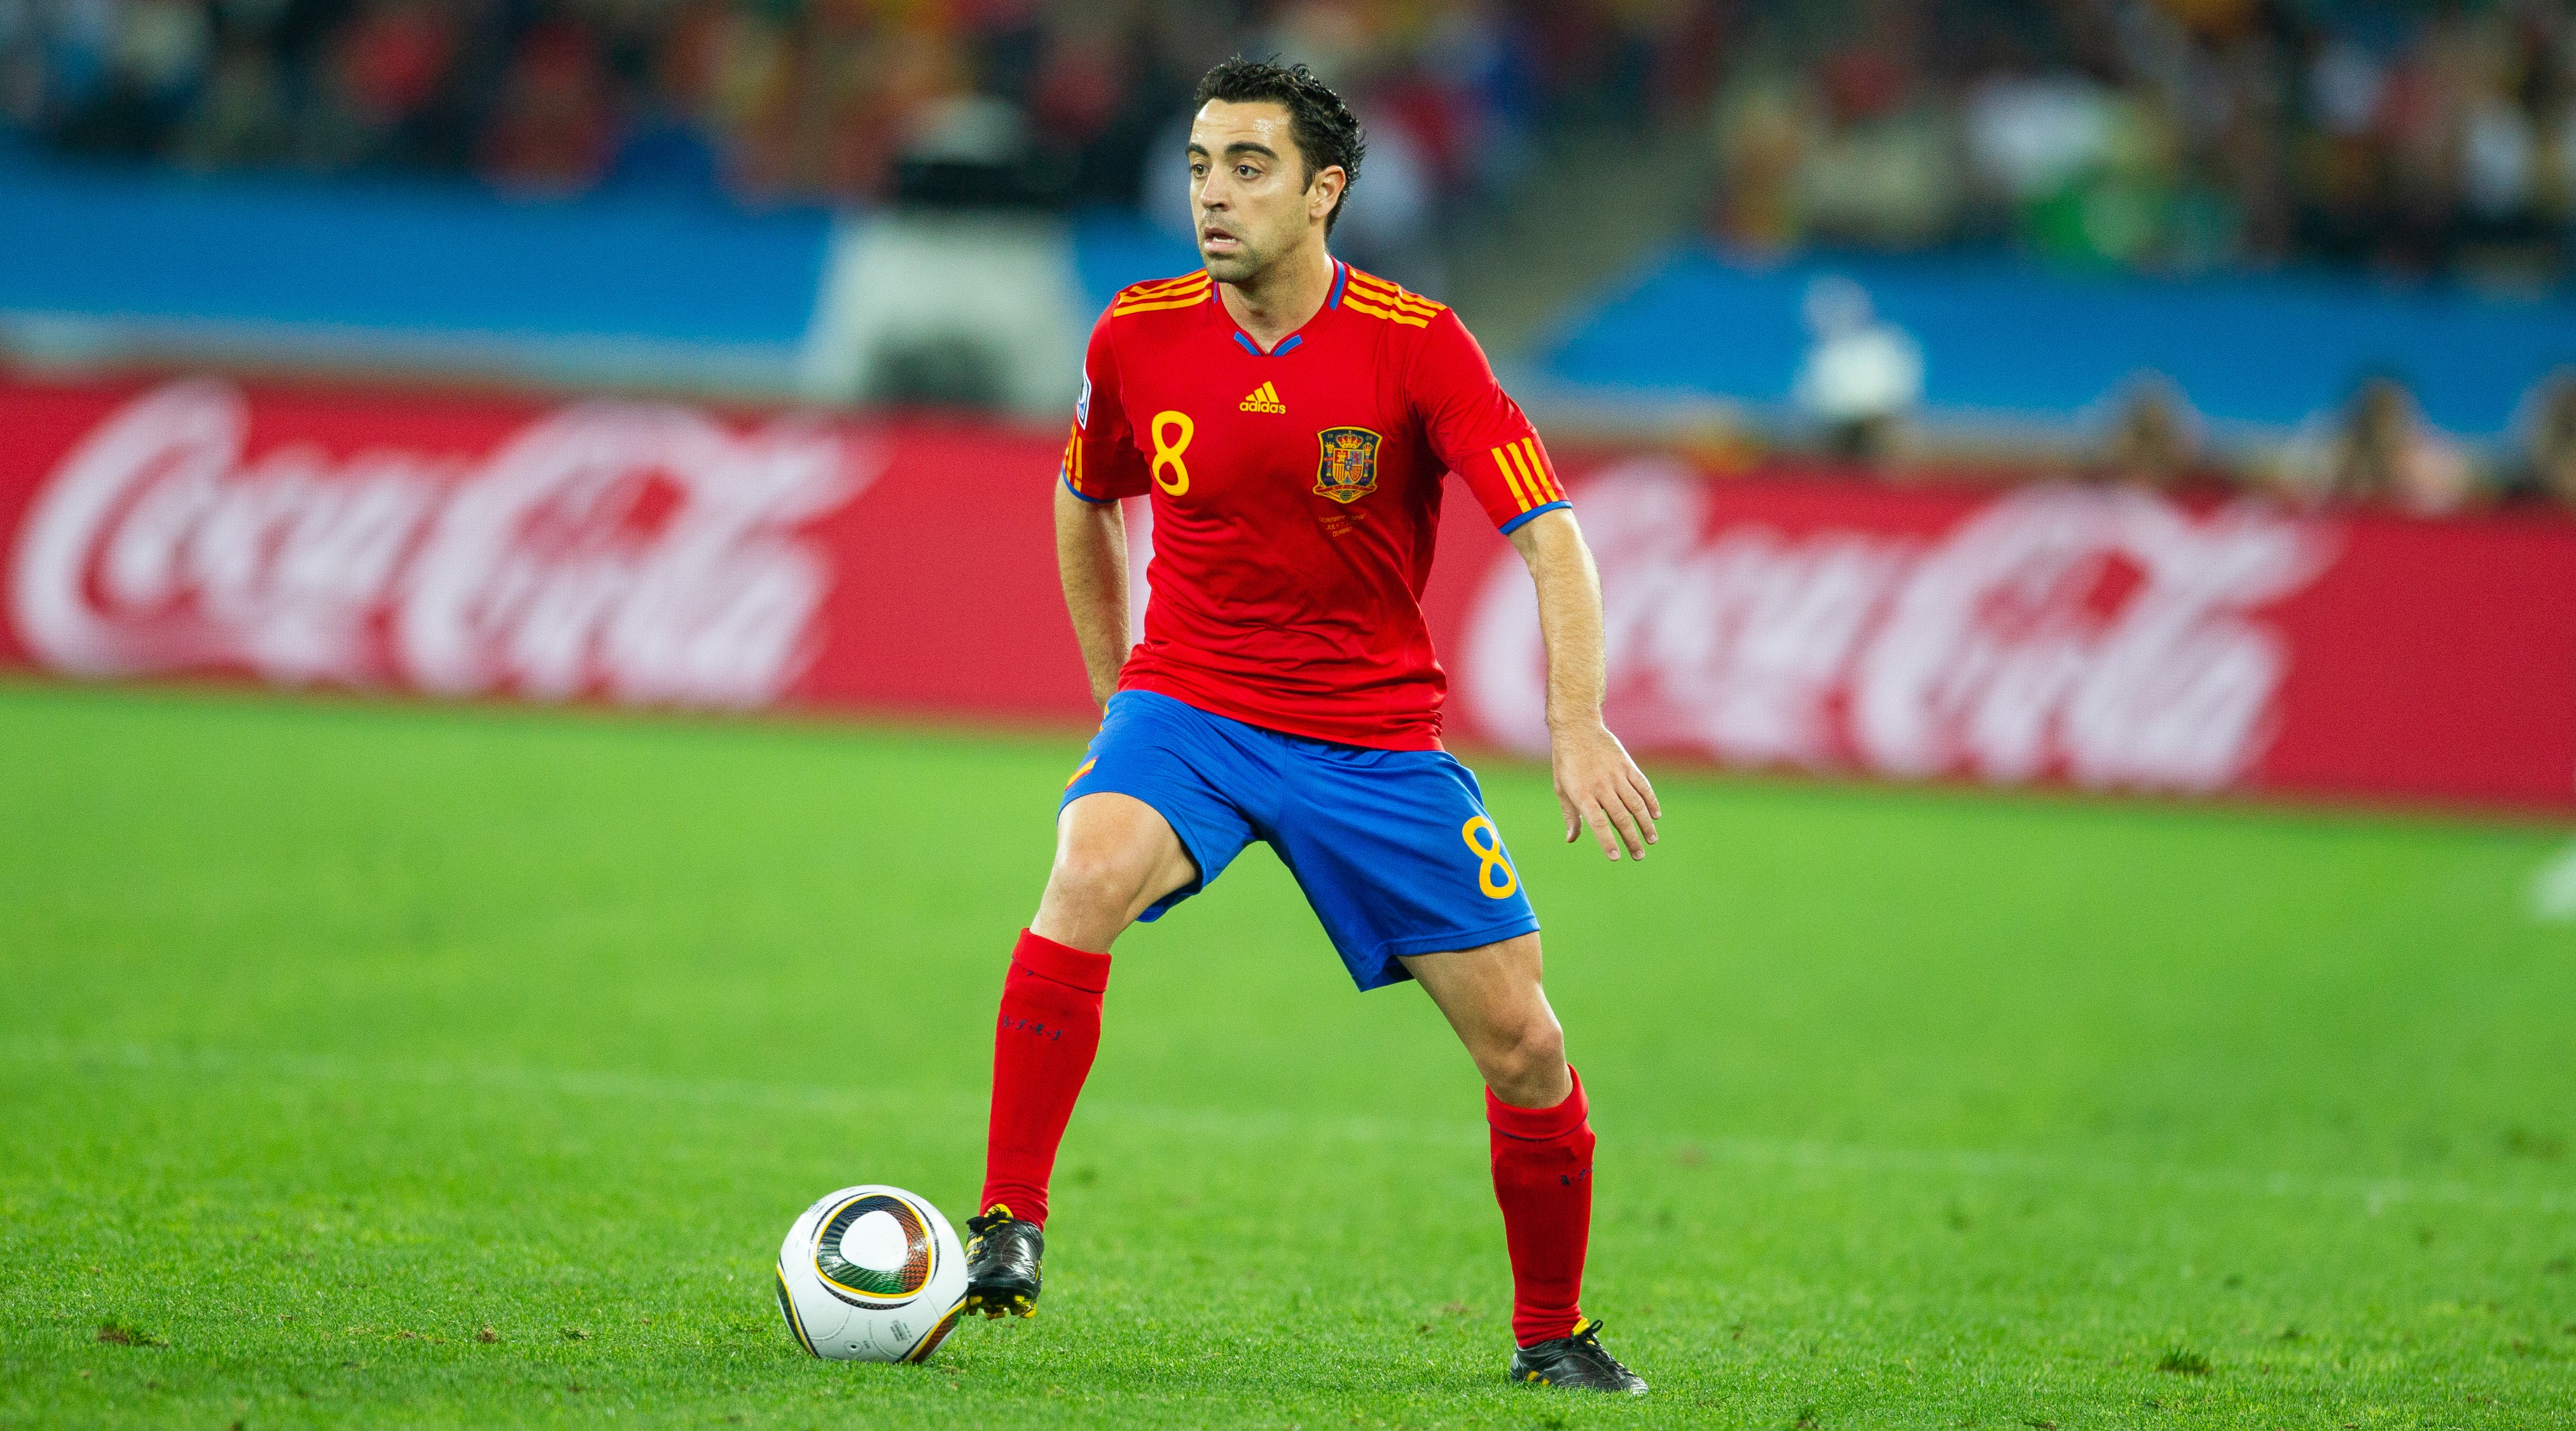 DURBAN, SOUTH AFRICA - JULY 07: Xavi Hernandez of Spain in action during the World Cup Semi Final match between Spain (1) and Germany (0) at the Durban Stadium on July 7, 2010 in Durban, South Africa (Photo by Simon Bruty/Anychance/Getty Images)